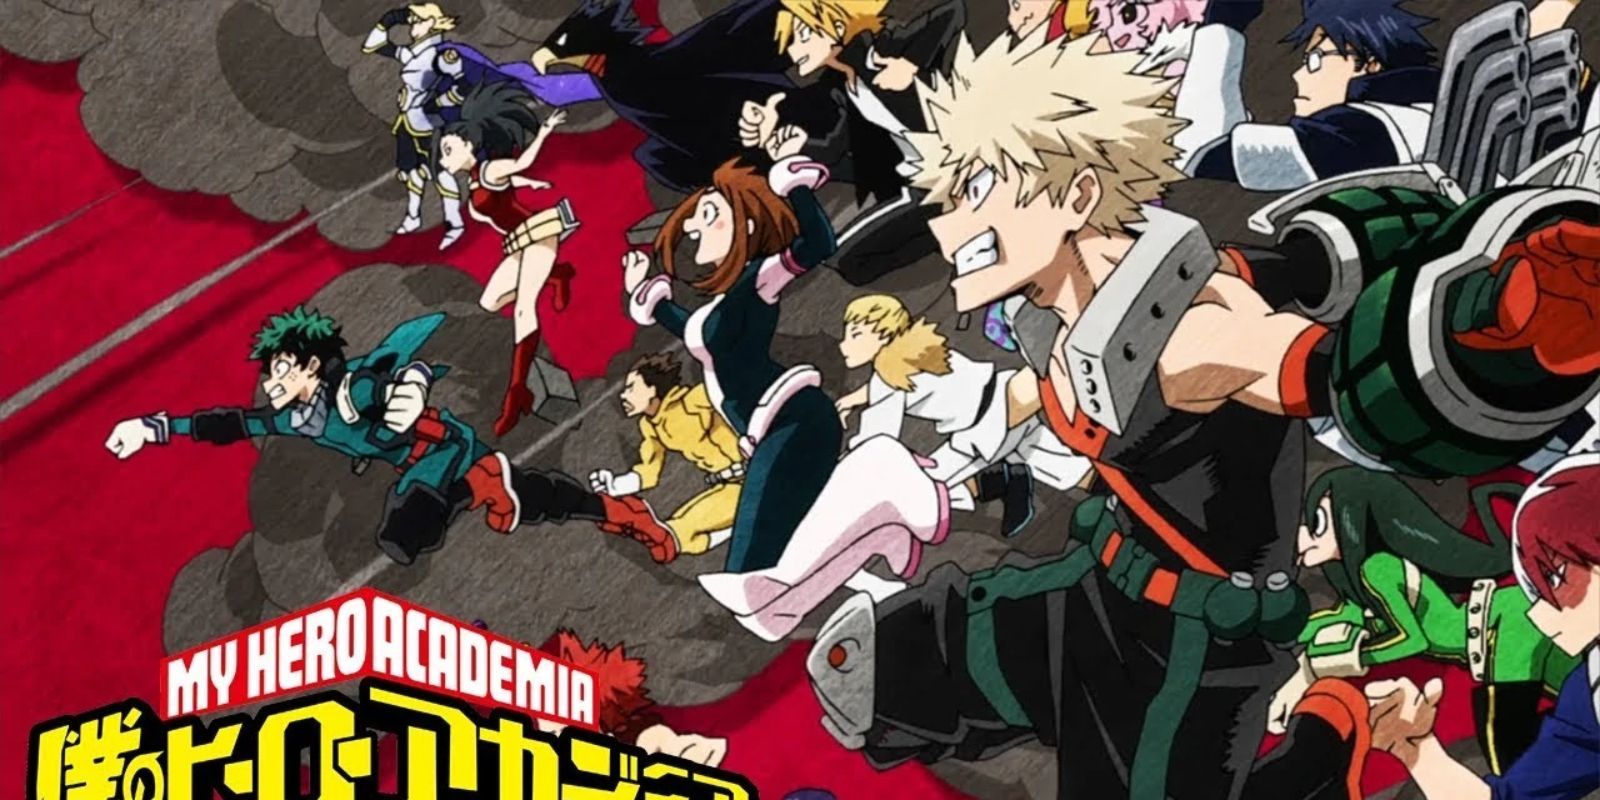 Class 1-A Posed Ready To Fight